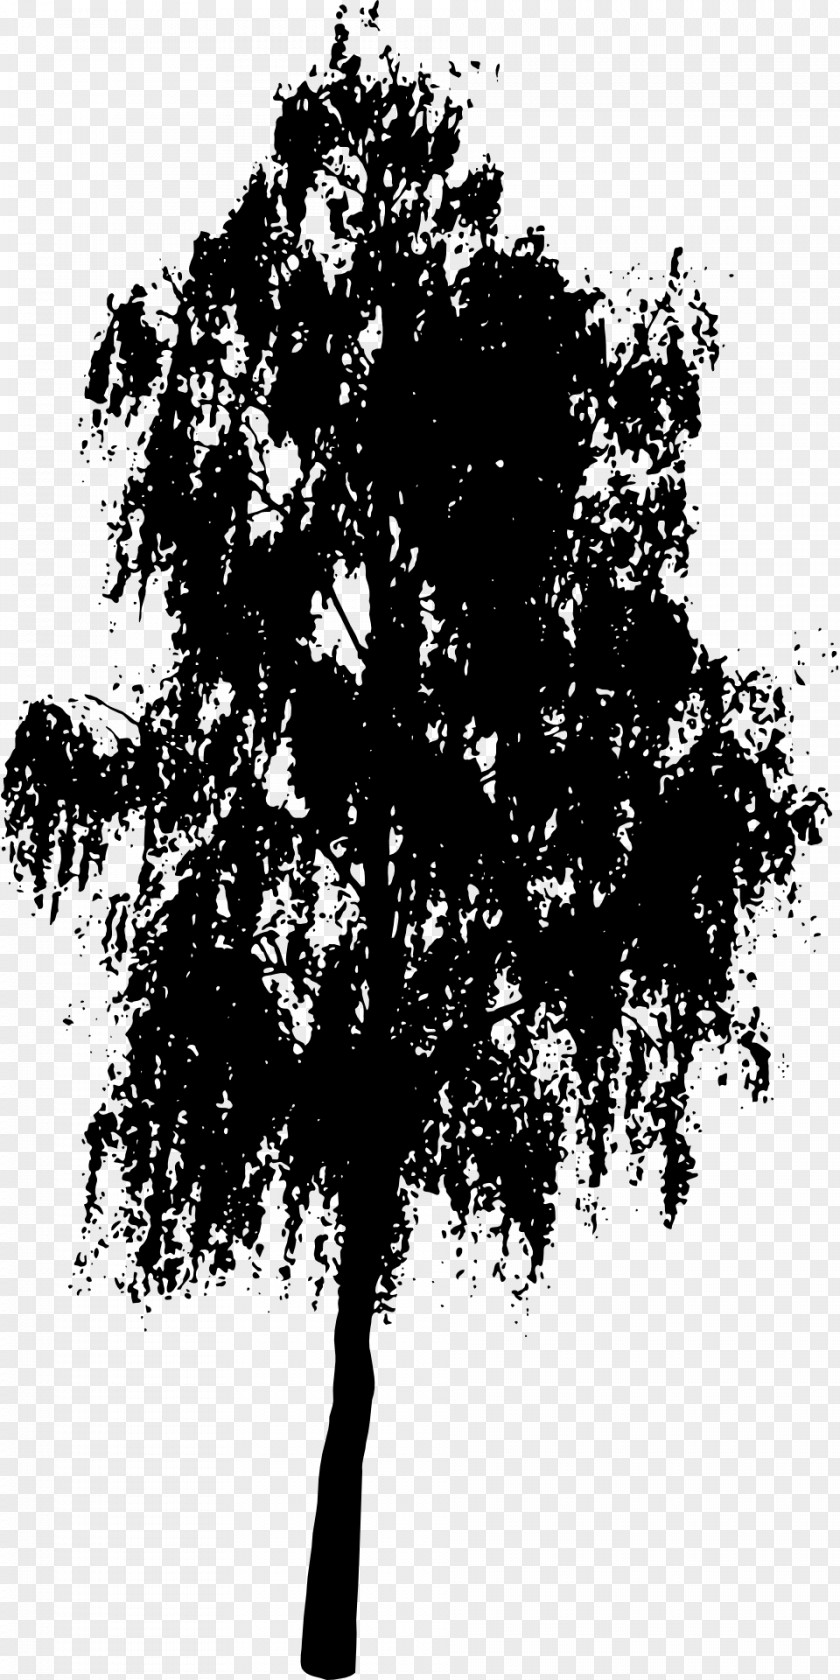 Silhouette Tree Clip Art PNG